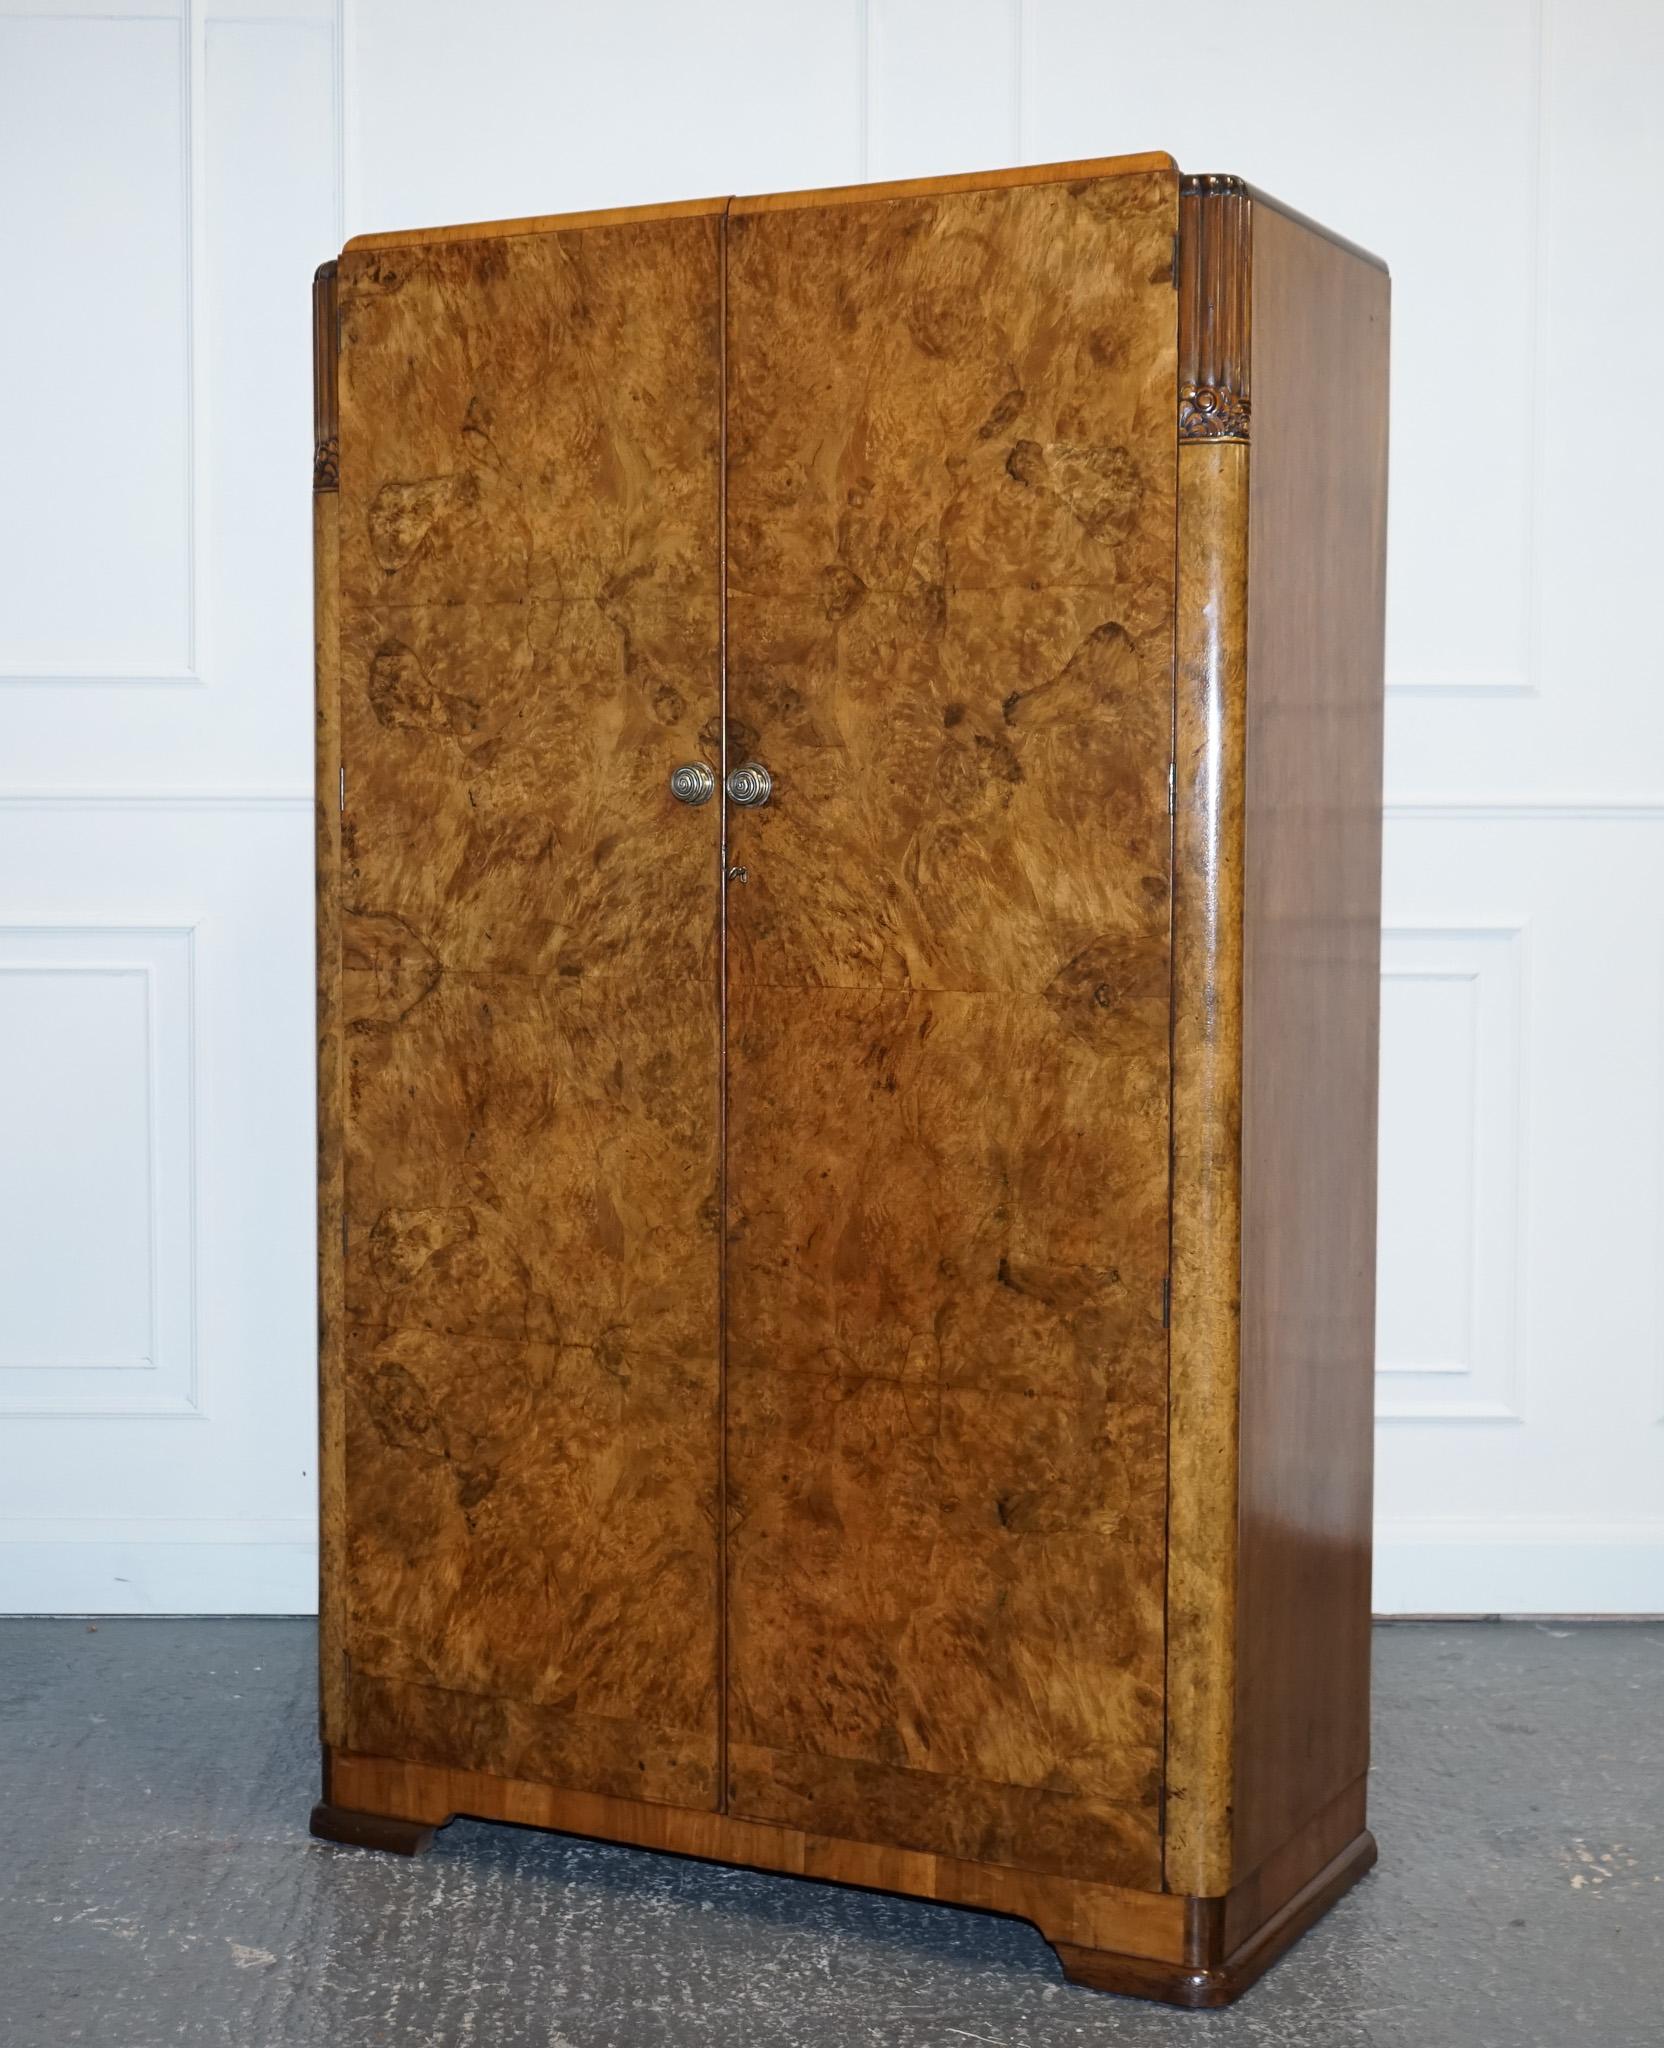 
We are delighted to offer for sale this English Art Deco 1930s Burr Walnut Wardrobe.

This stunning 1930s Art Deco double wardrobe is a true beauty.
 Its geometric lines and symmetry are reminiscent of the Art Deco style, while the rich burr